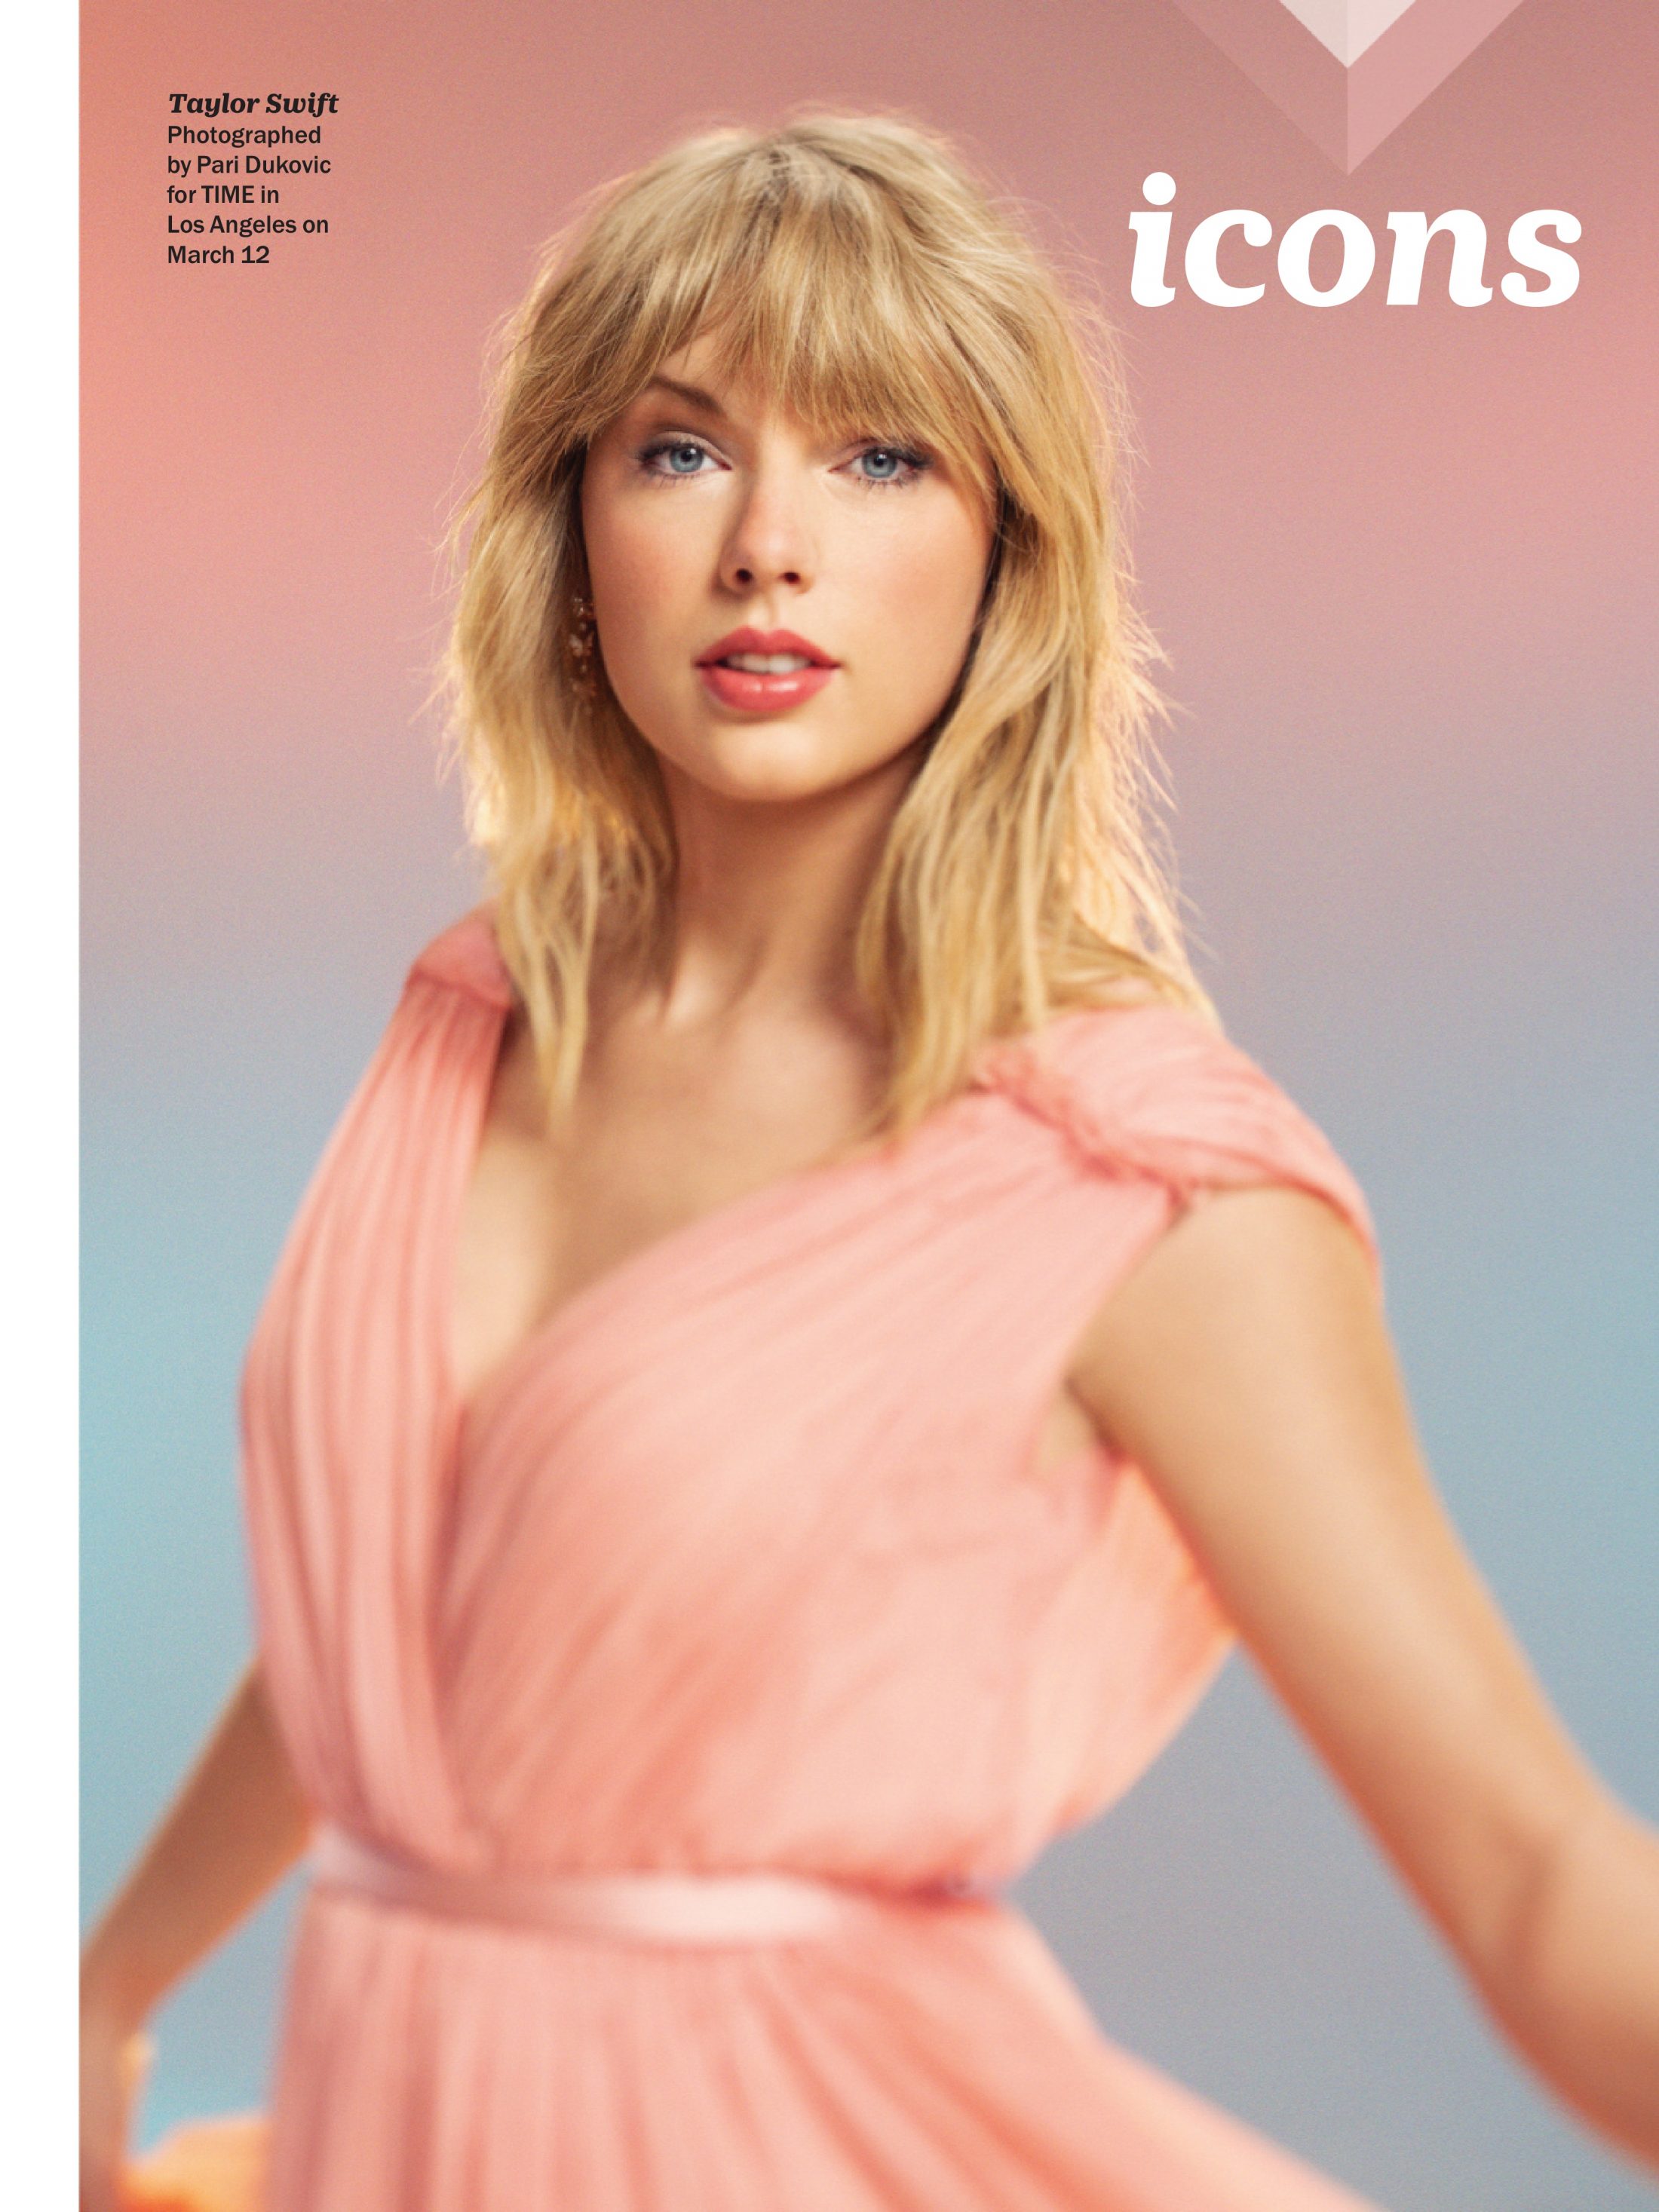 Taylor Swift for TIME100 Magazine (April/May 2019)